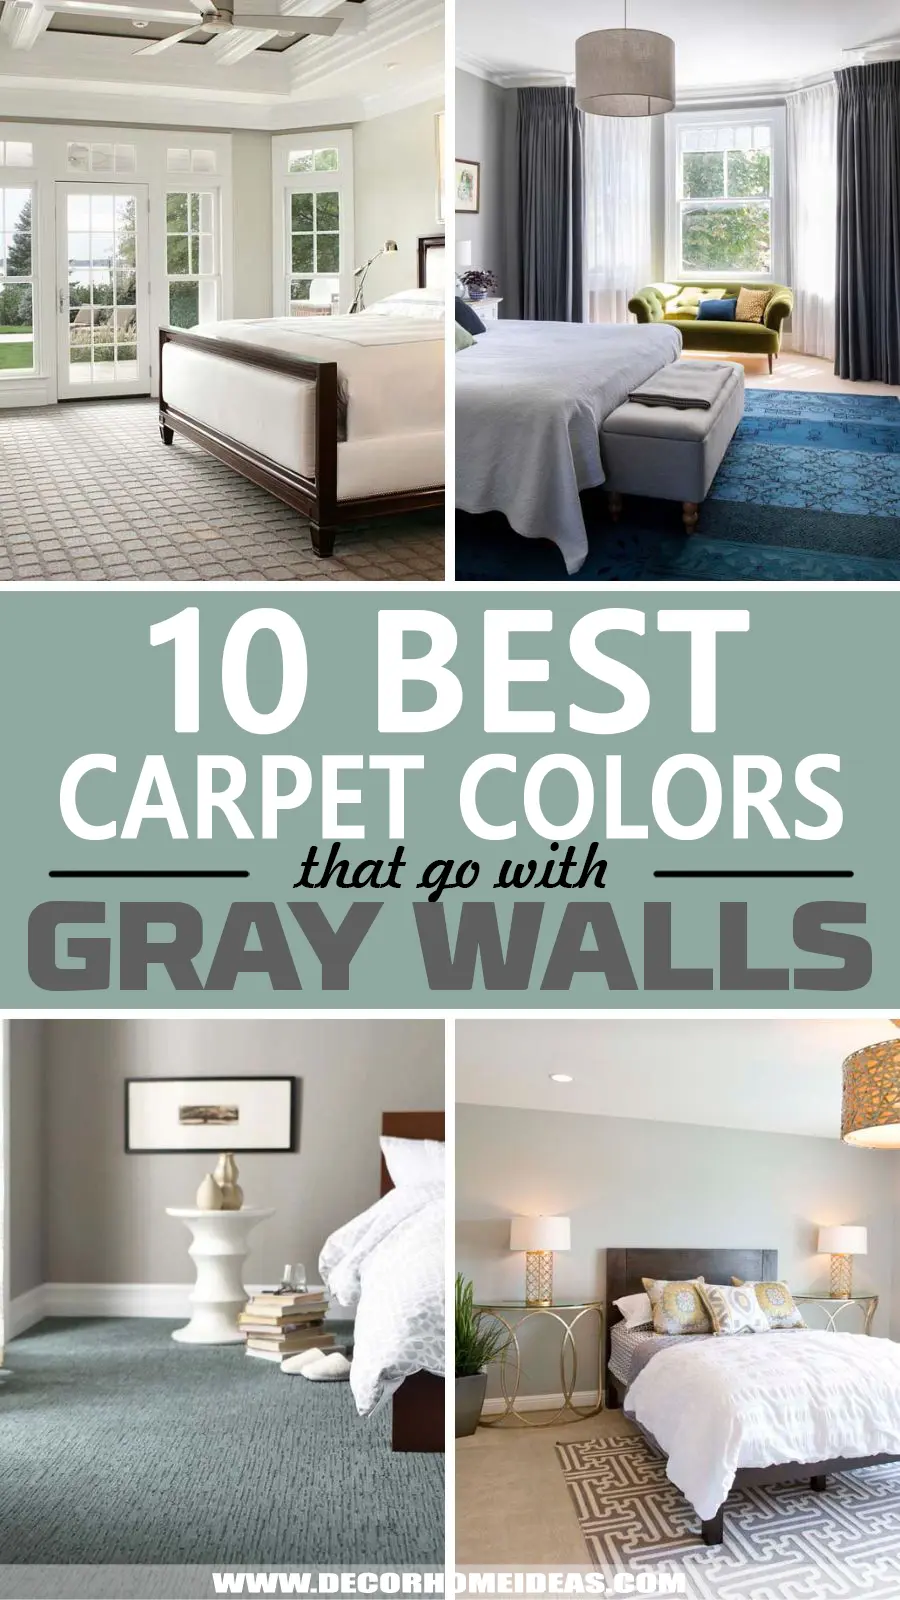 Carpet Colors For Gray Walls. Are you in search of the best carpet color to match your gray walls? We have the best color ideas and patterns to create the perfect combination for your room.